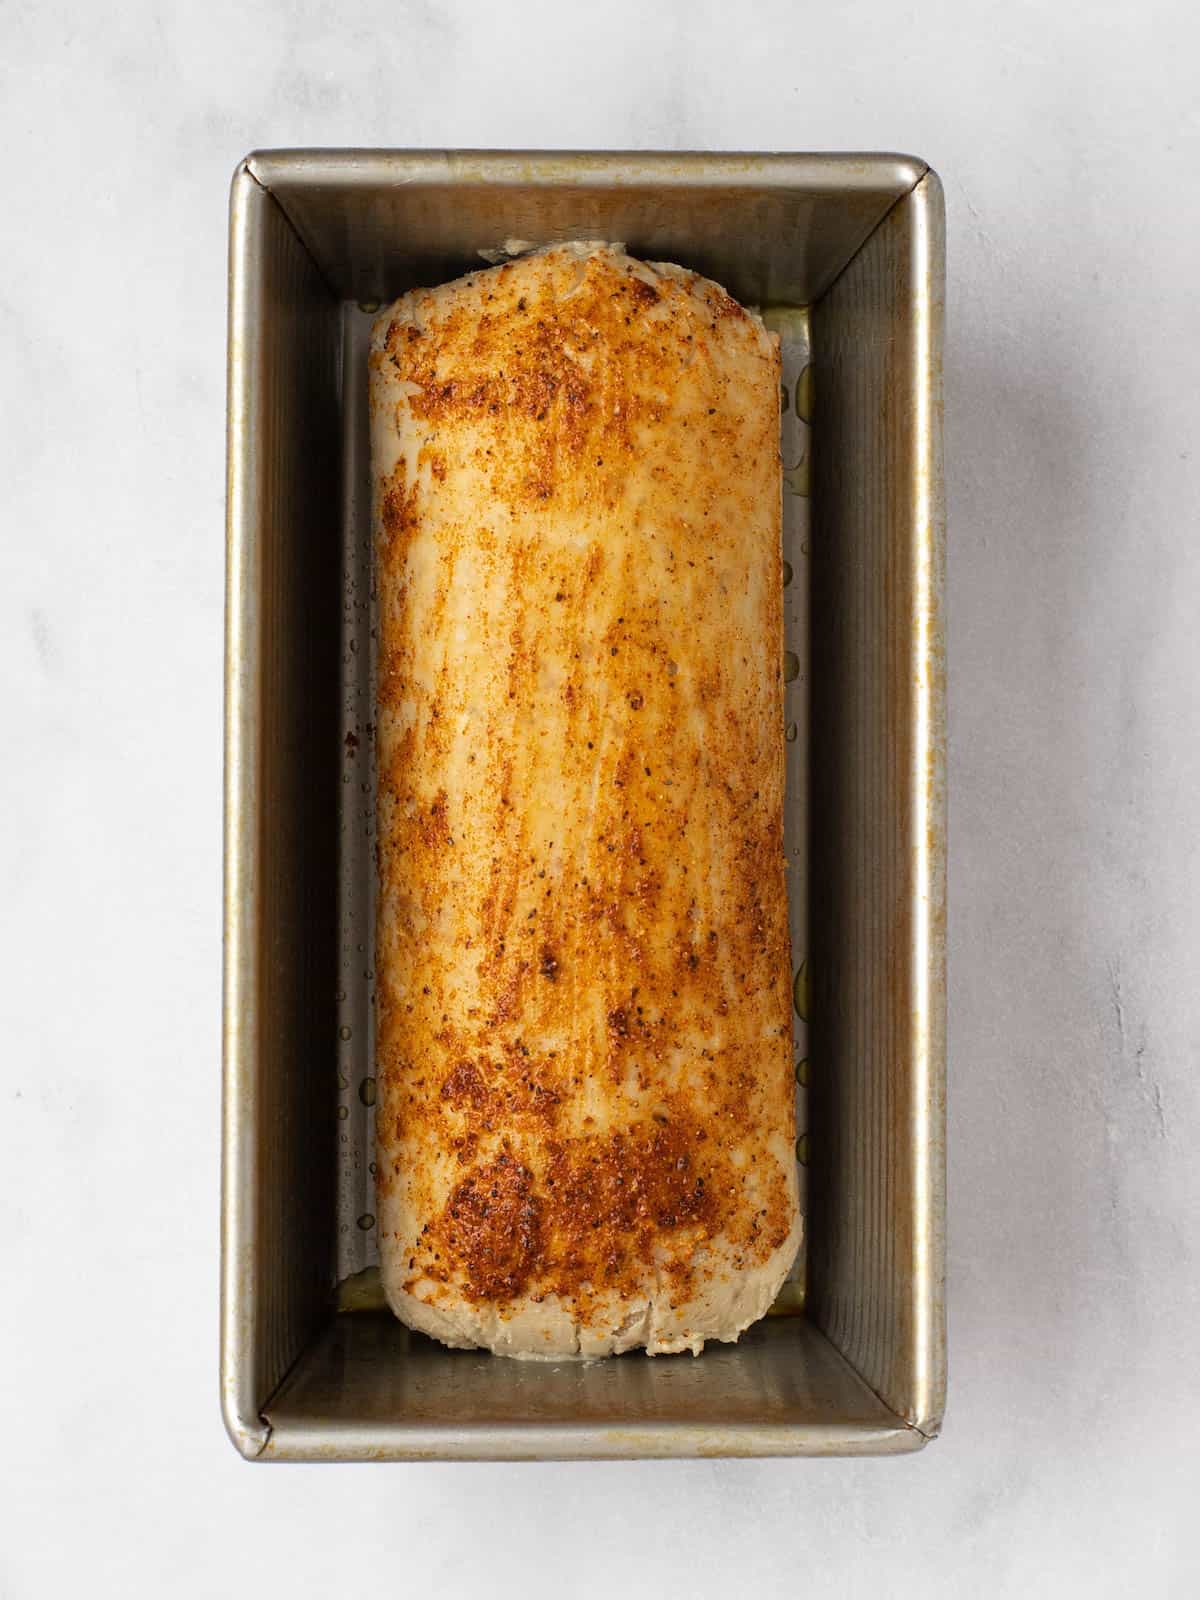 Gefilte fish loaf in a baking pan brushed with oil and spices.